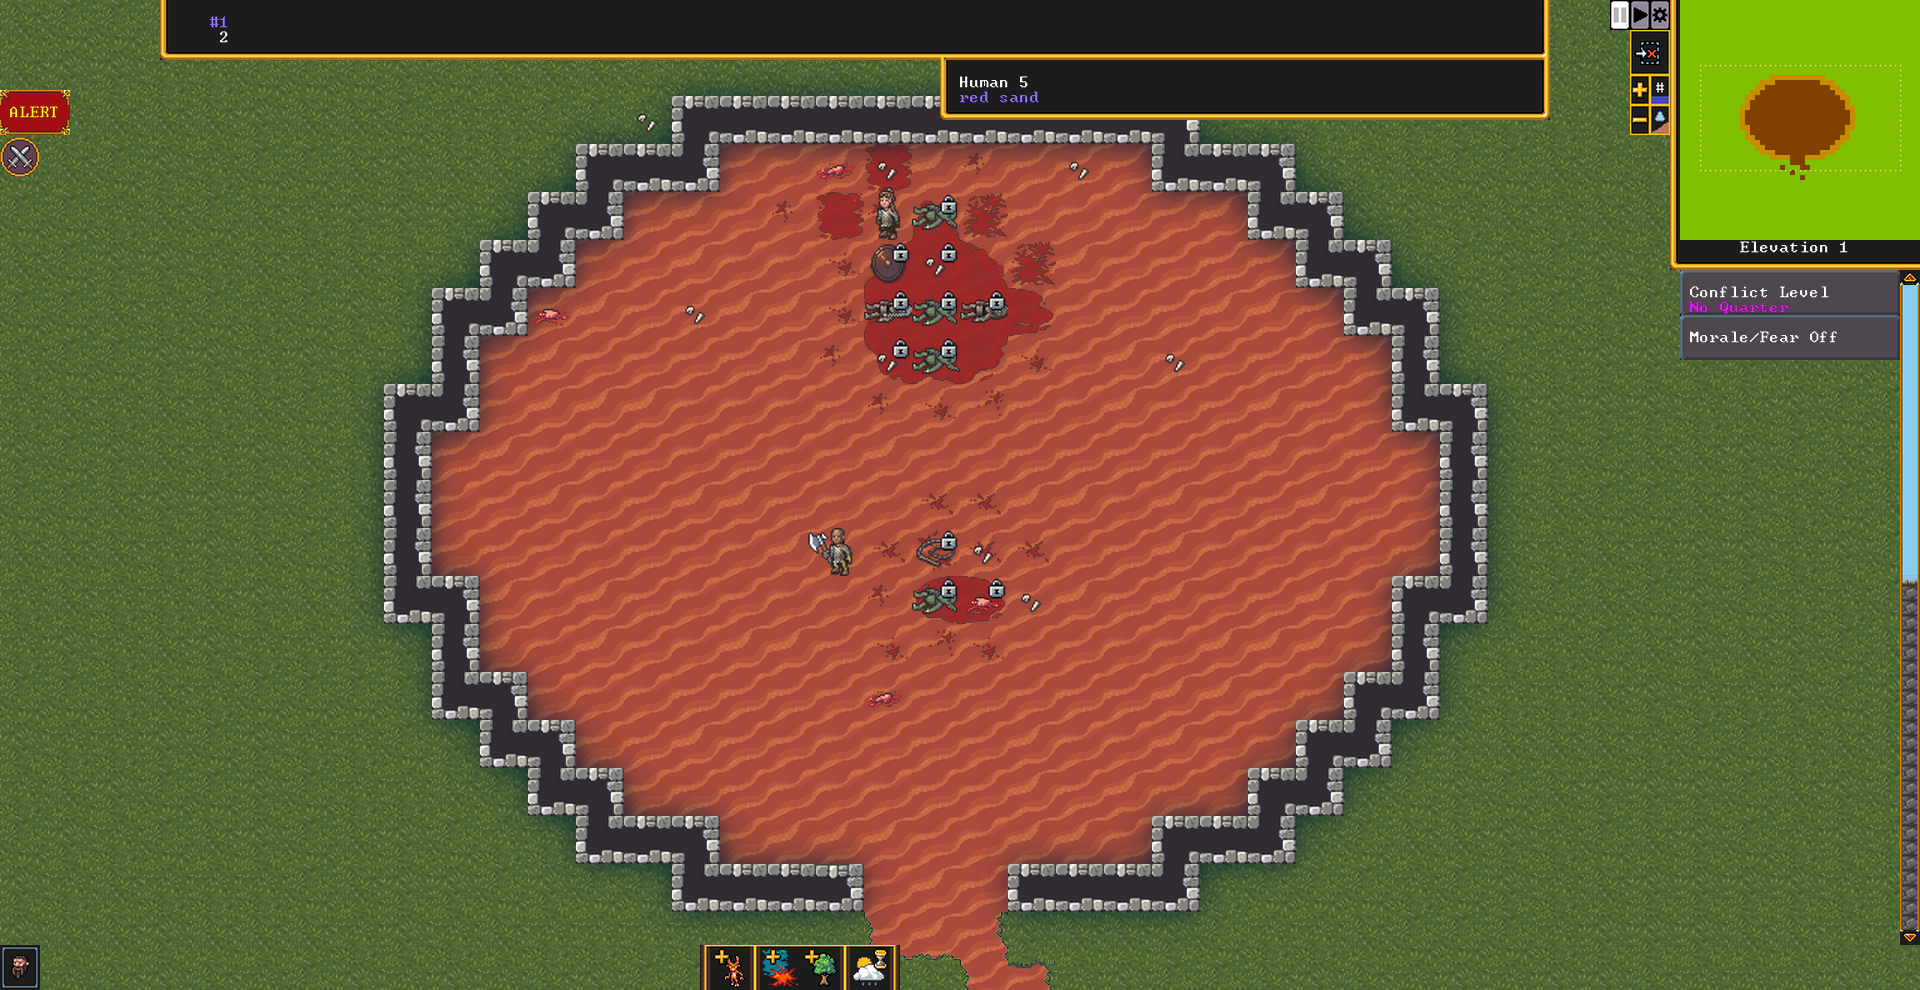 Some people stand around and some other people lie in pools of blood, rendered in topdown pixel art, in Dwarf Fortress.